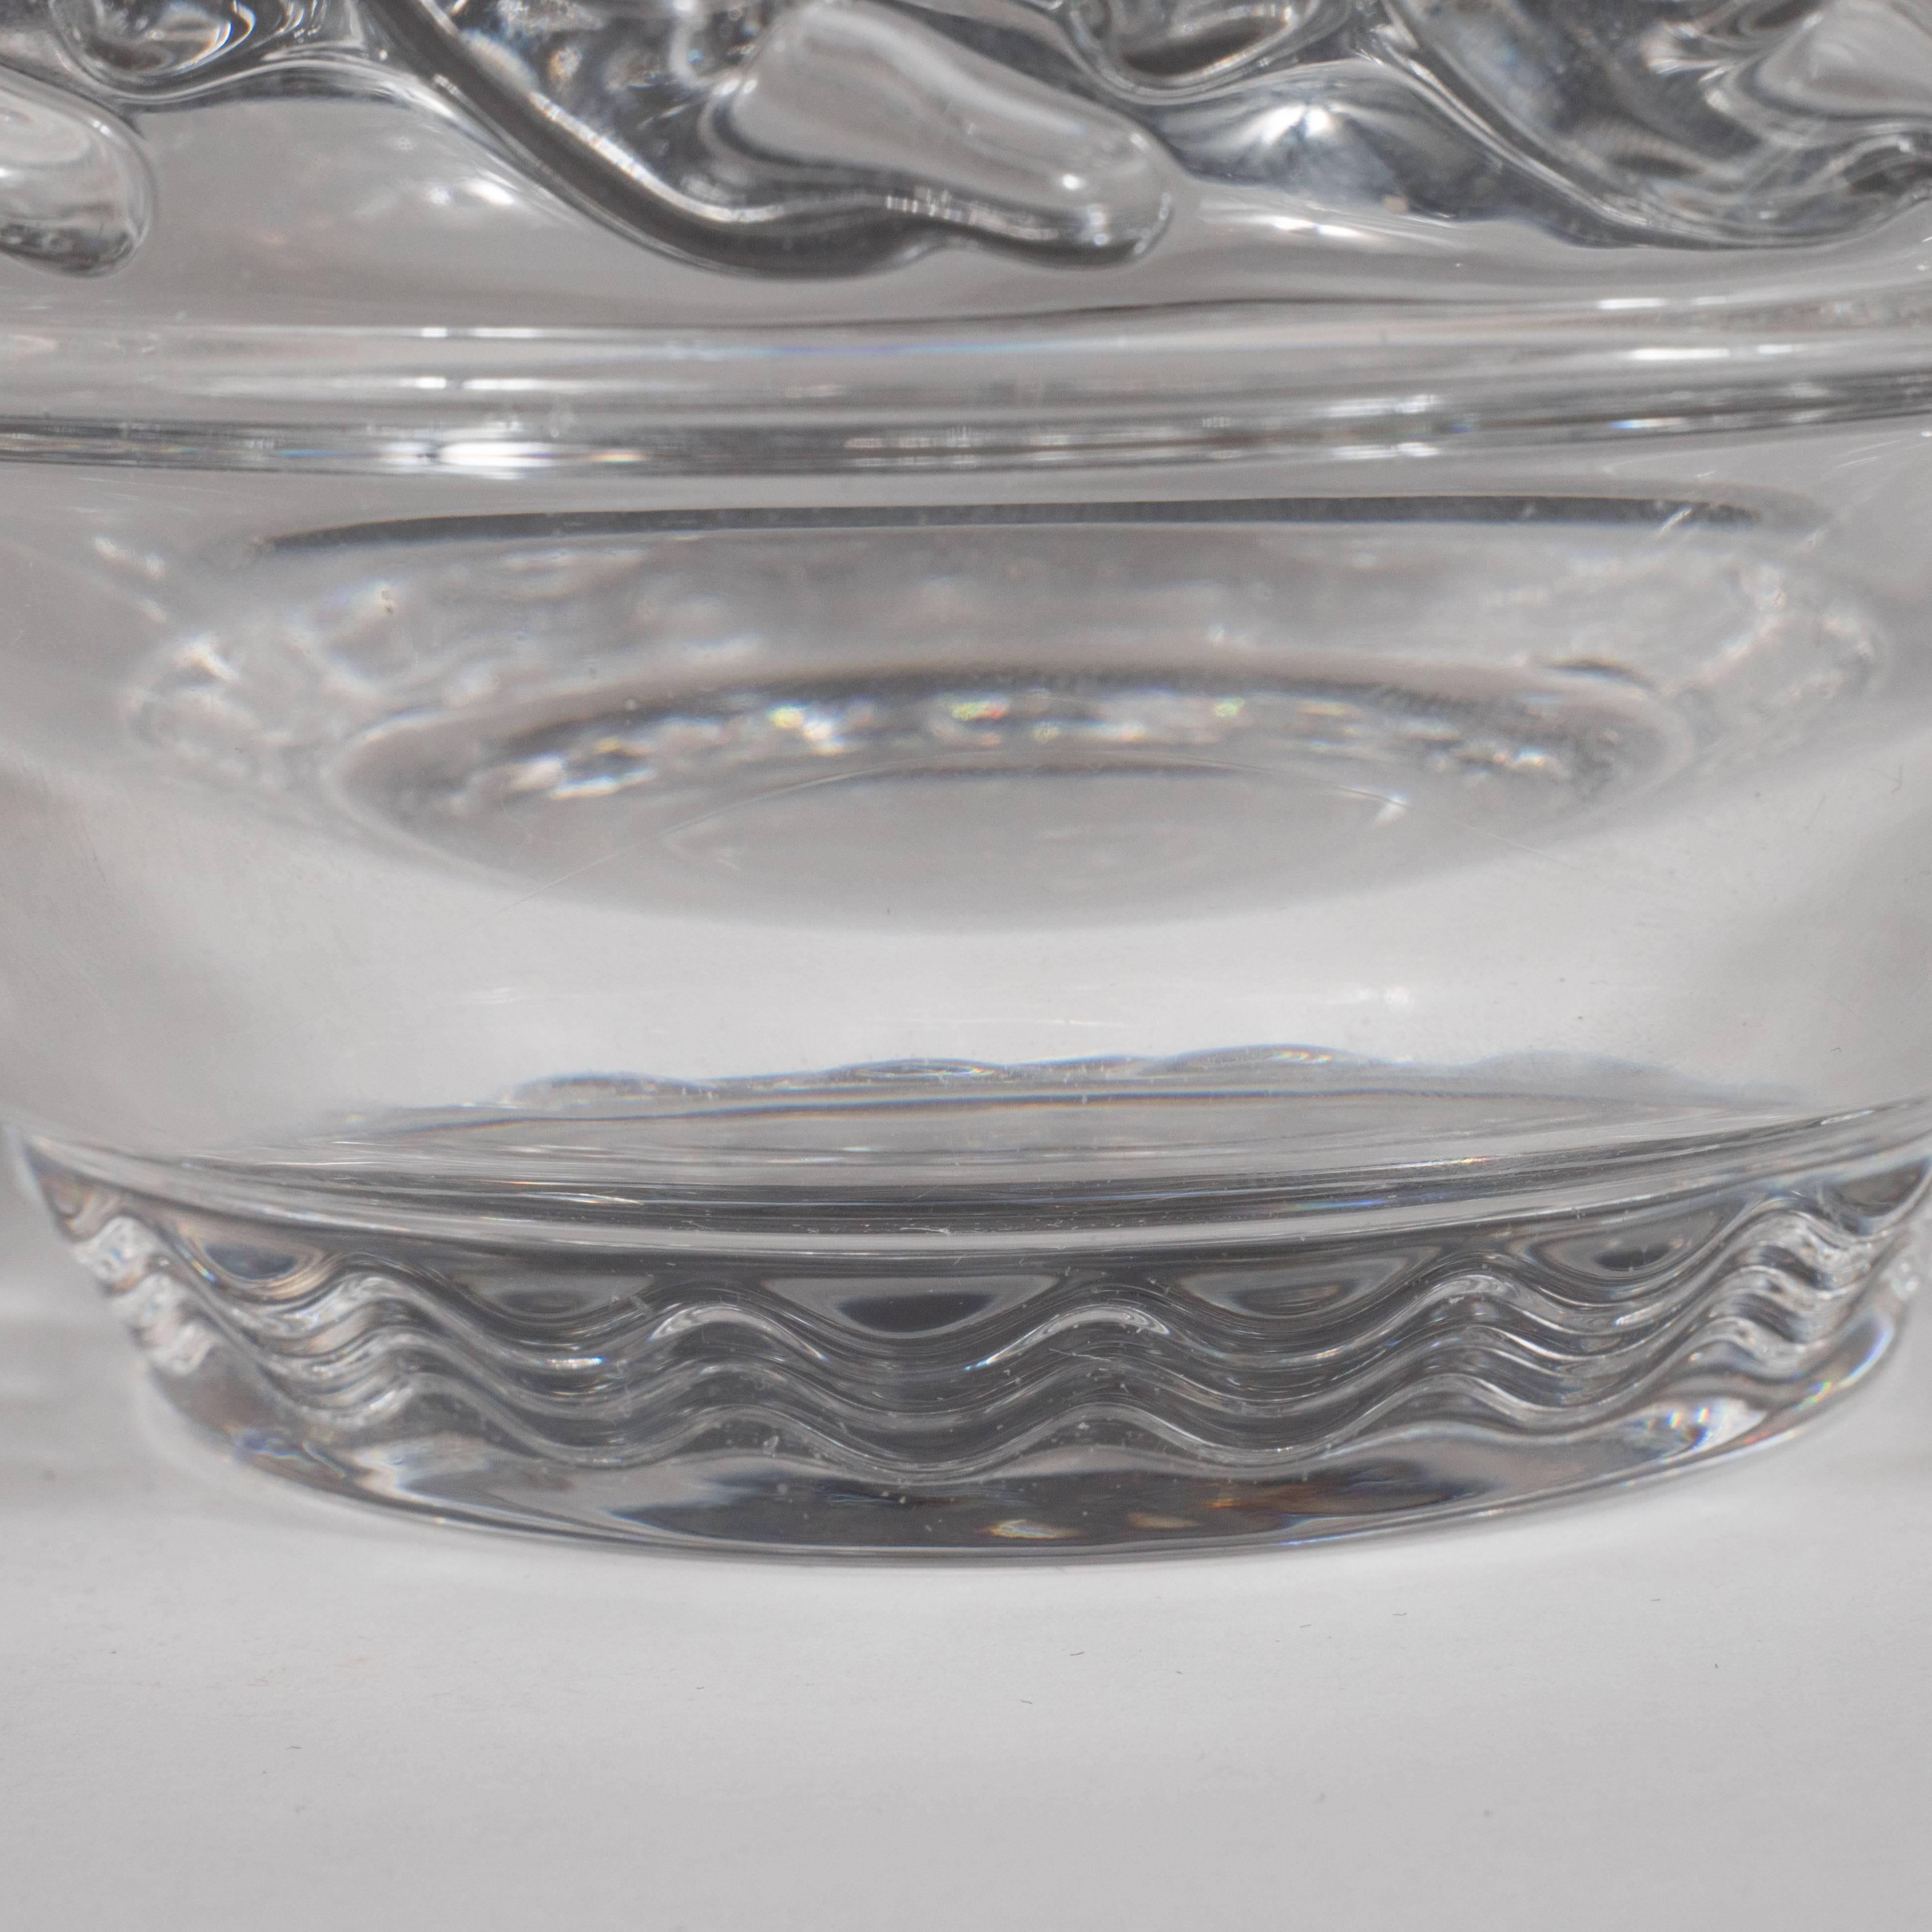 American Elegant Modernist Classical Themed Glass Bowl with Dolphin Motif by Tiffany & Co